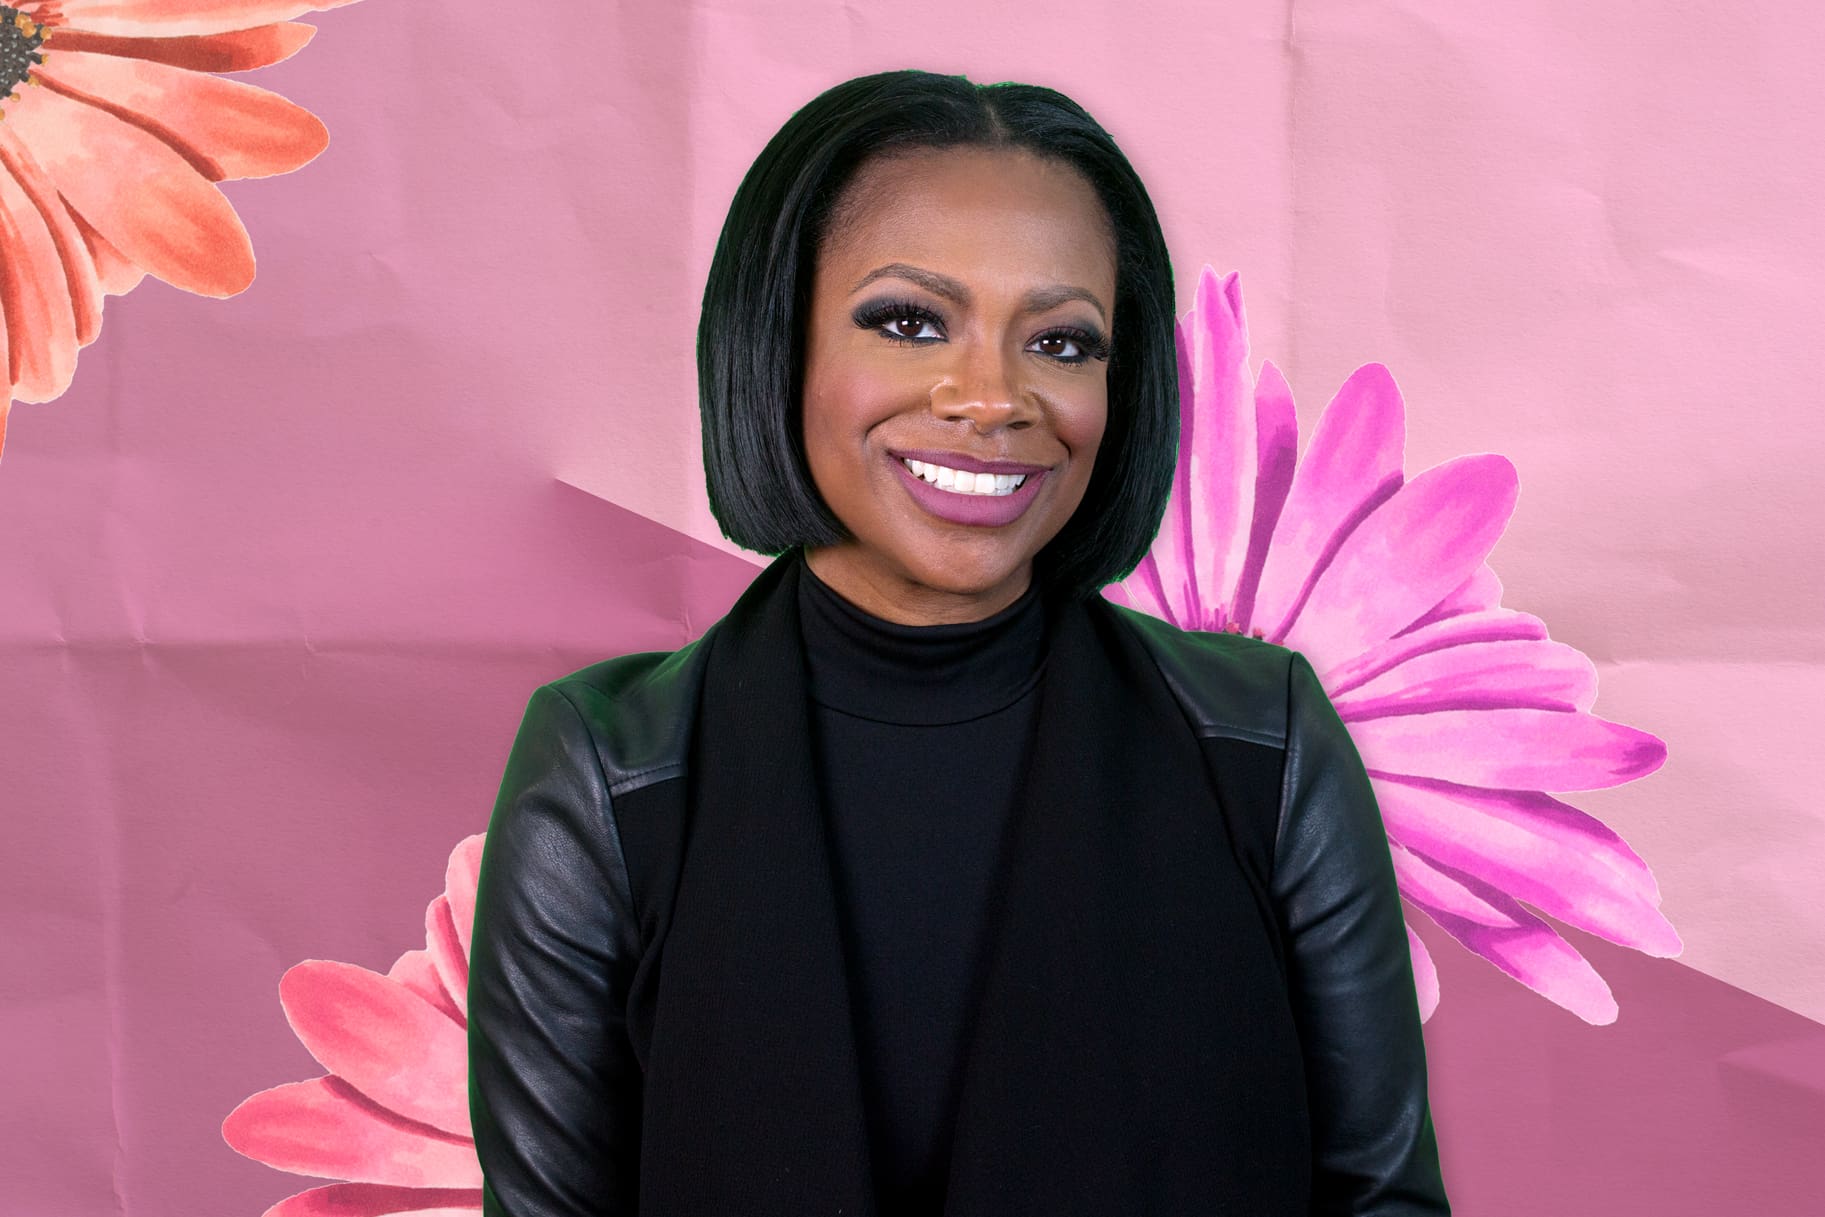 Kandi Burruss Is Already Getting Ready For The Holiday Season - Check Out Her Secret For Getting In Shape